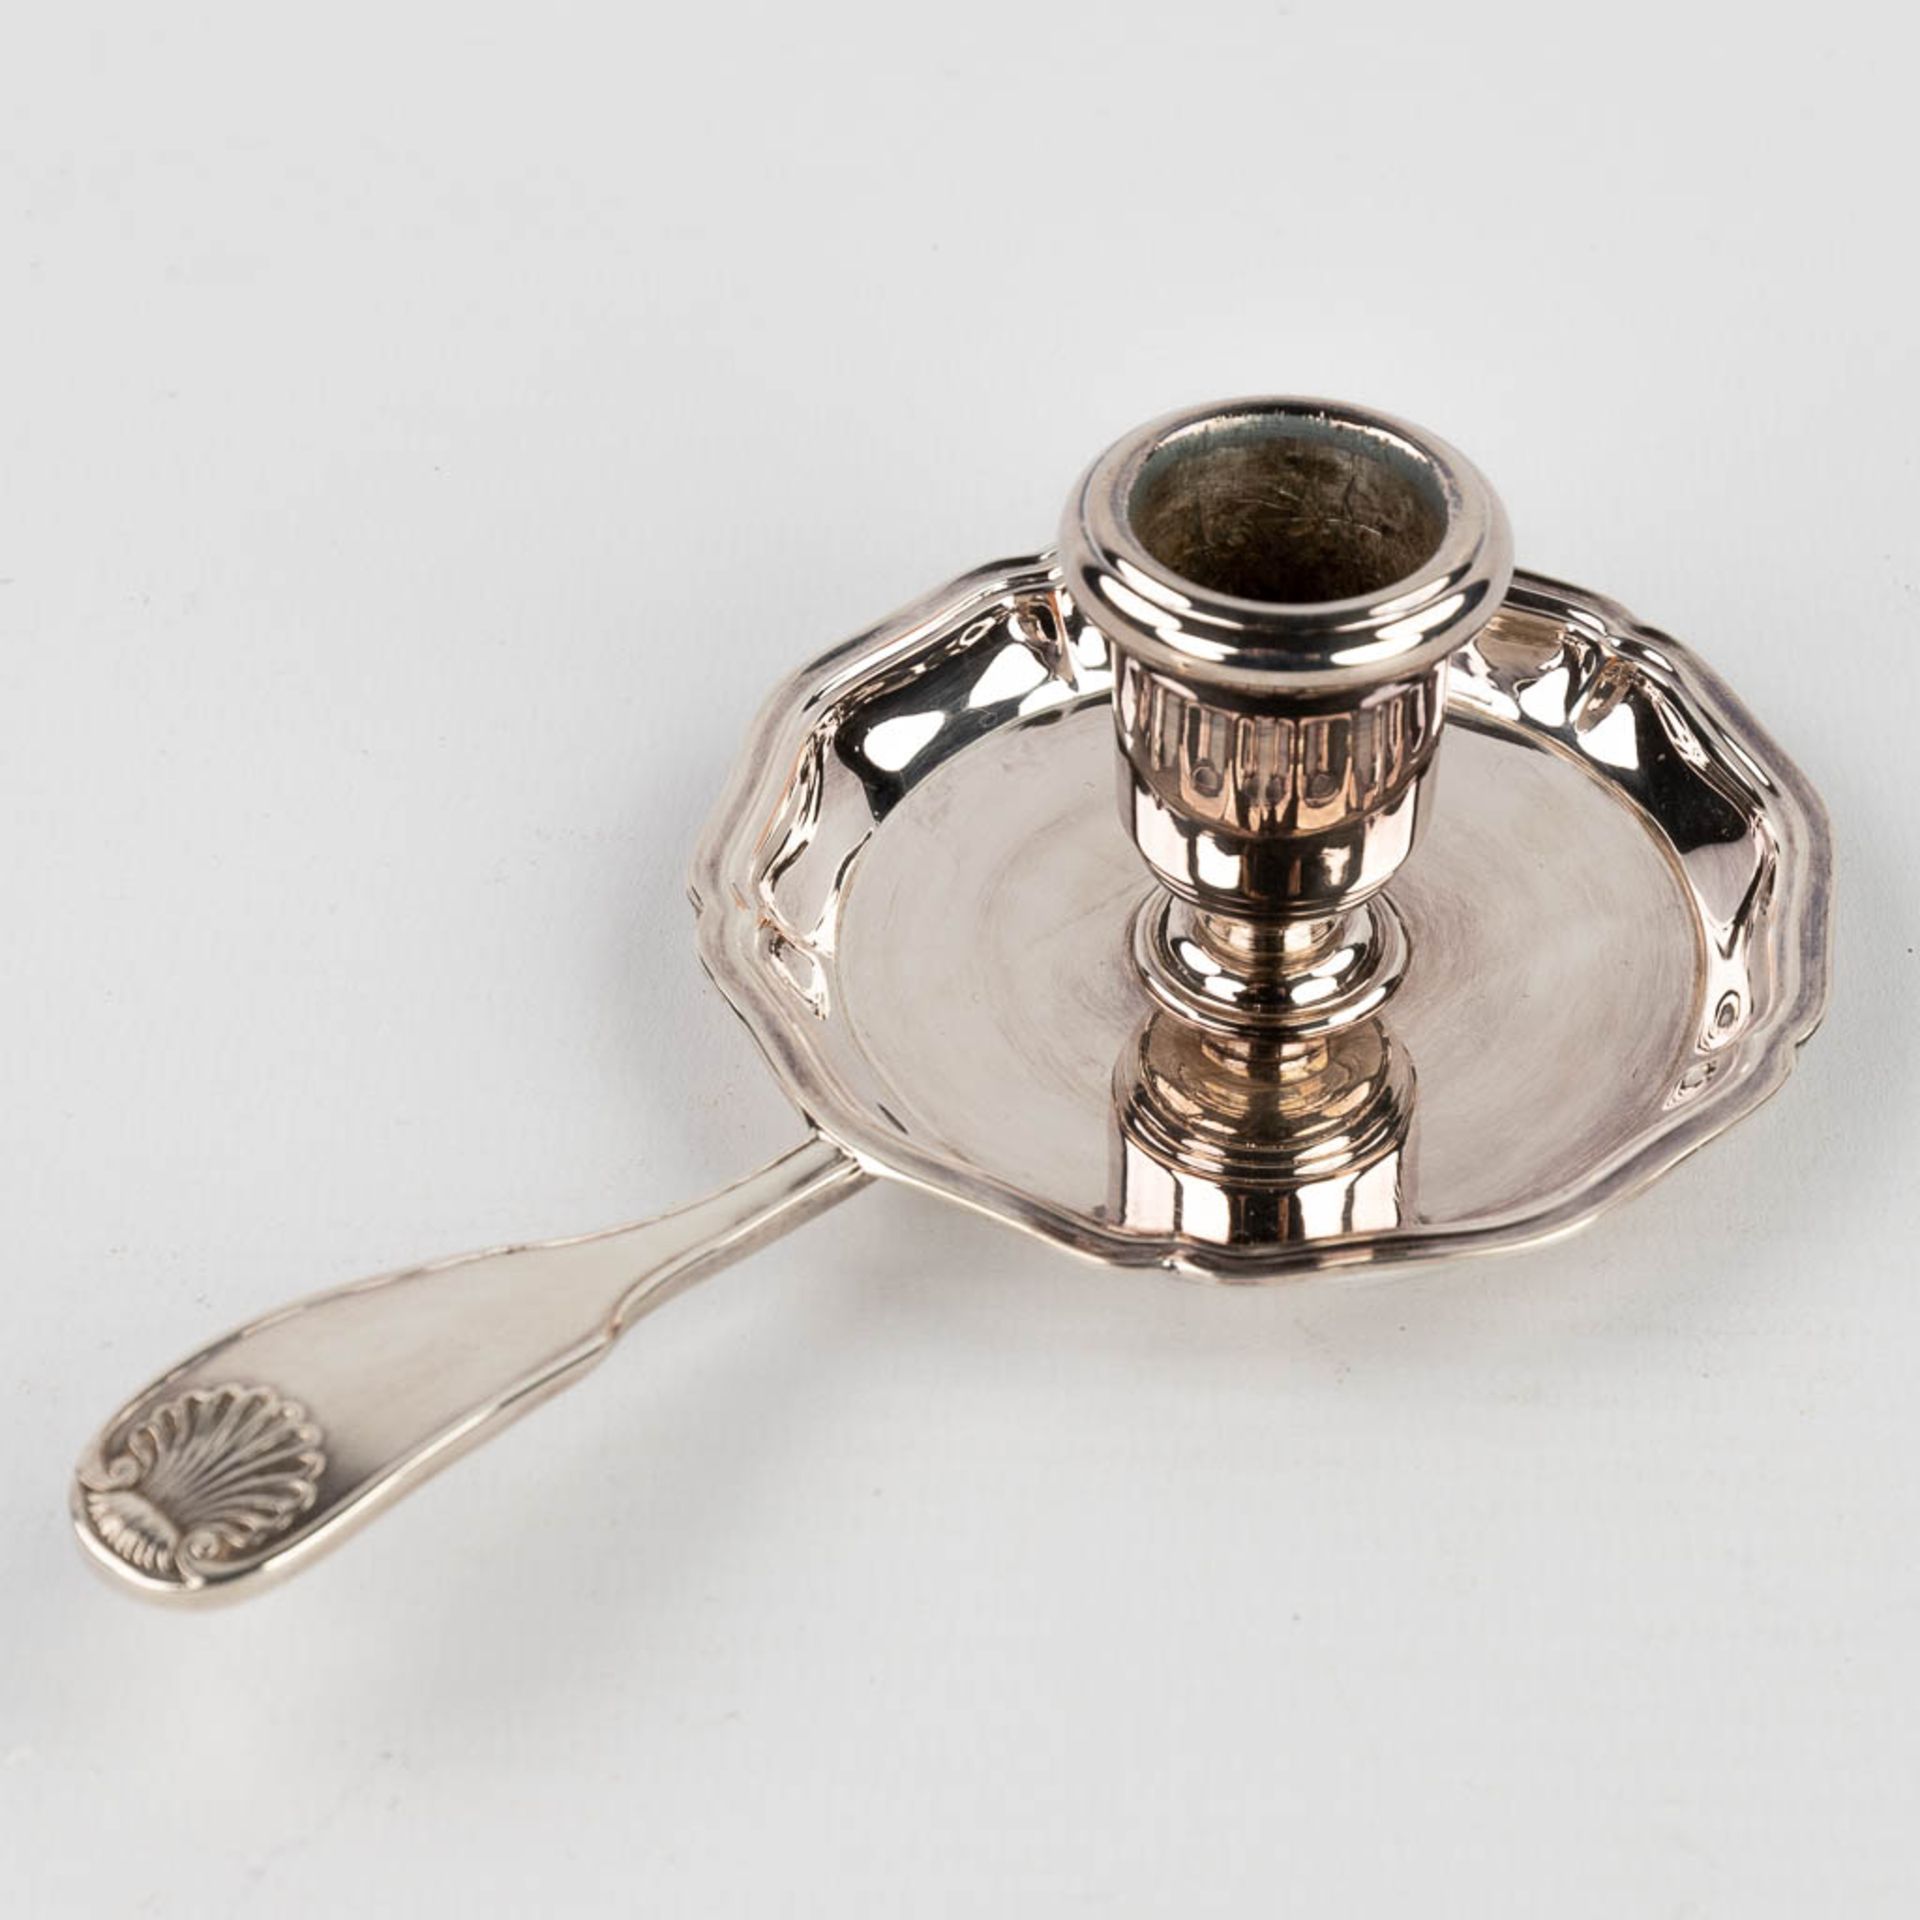 A collection of toilet accessories and goods, crystal, silver and silver-plated metal. (H: 12 cm) - Image 17 of 19